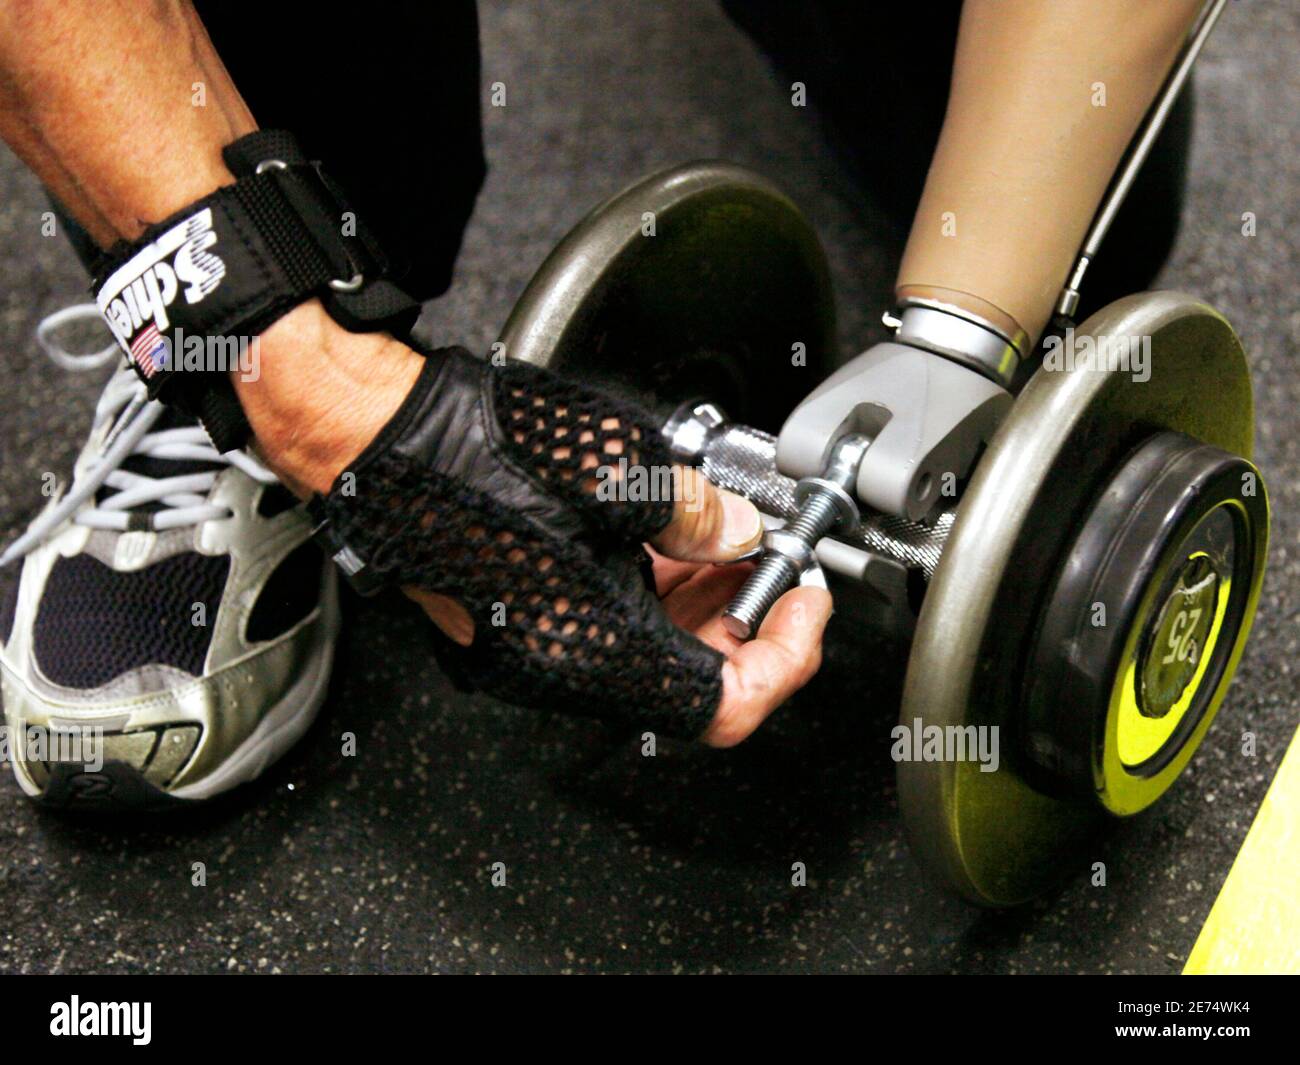 Bob Radocy of TRS Inc. attaches a prosthetic hand designed for weightlifting  to a barbell at a gym in Boulder, Colorado August 21, 2009. Radocy designs  and builds prosthetic attachments that allow